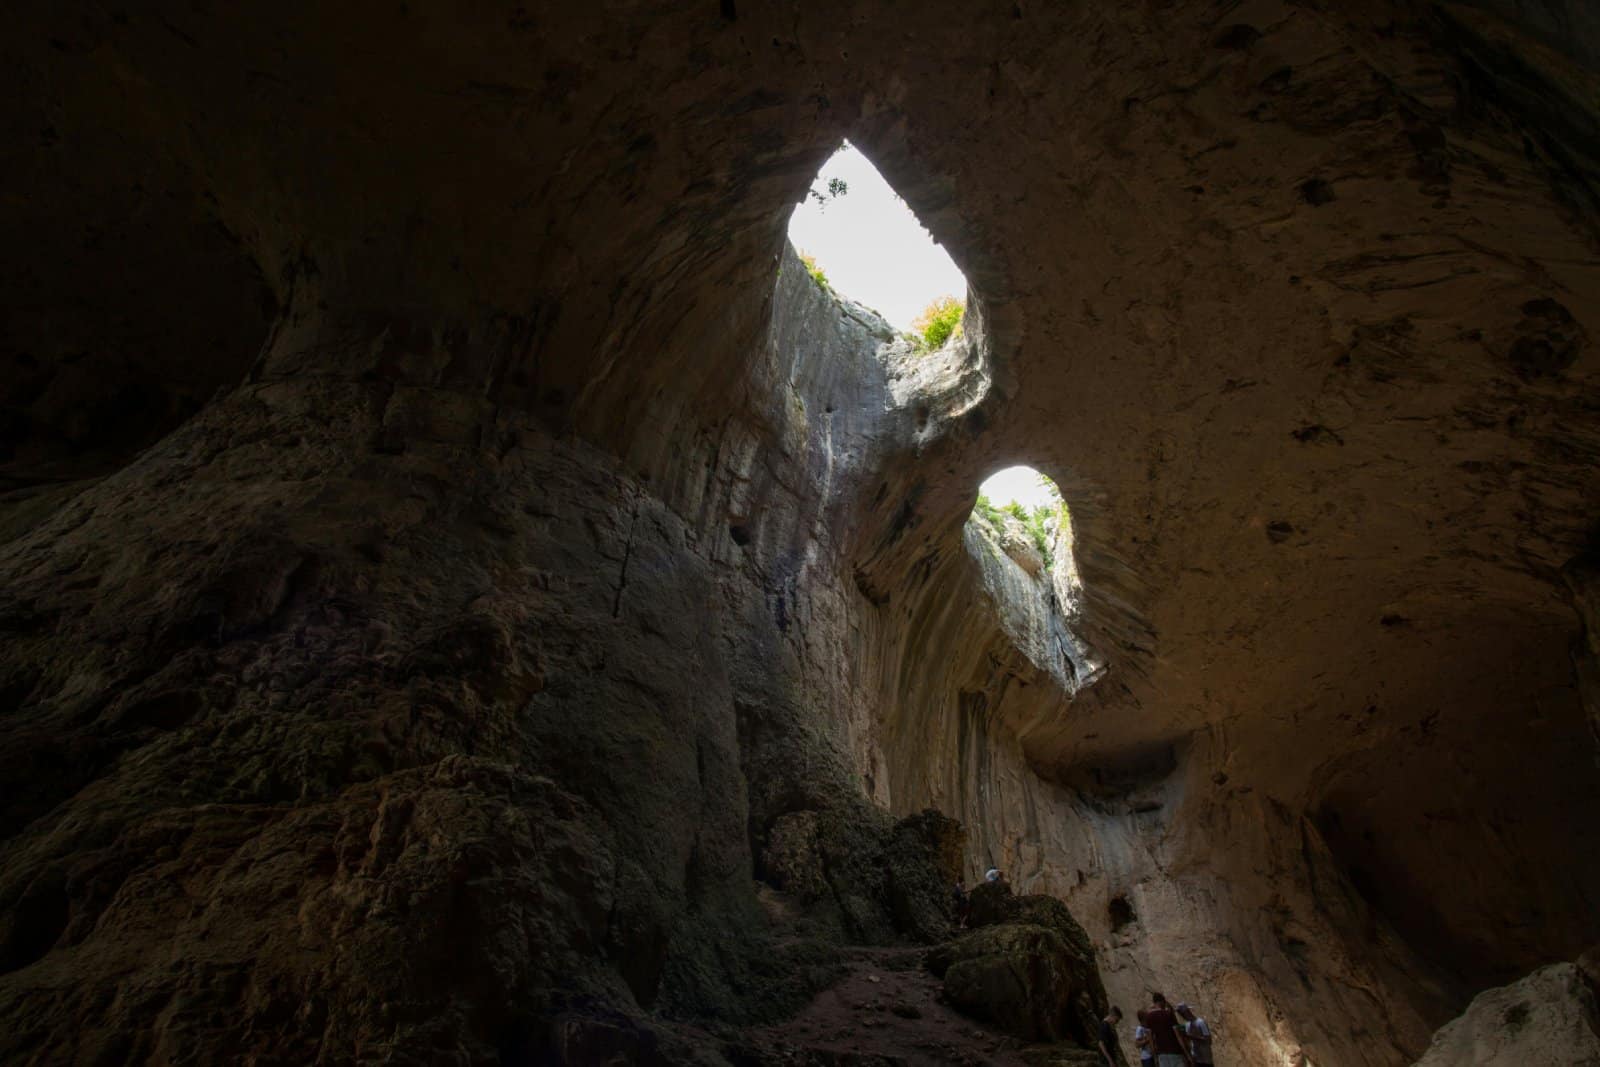 <p class="wp-caption-text">Image Credit: Pexels / Rainer Eck</p>  <p><span>Veryovkina Cave, another jewel in the crown of Abkhazia’s Arabika Massif, has been explored to 2,212 meters (7,257 feet), making it one of the world’s deepest caves. Discovered in 1968 but only extensively explored in recent decades, Veryovkina offers a unique glimpse into the vertical world.</span></p> <p><span>The cave features a series of vertical pits, narrow passages, and large halls adorned with stunning speleothems that tell the story of the Earth’s geological past.</span></p> <p><b>Insider’s Tip: </b><span>Waterproof equipment is a must. The cave’s environment is notoriously wet, with several sections requiring navigation through water-filled passages. Ensuring your gear is waterproof will keep you dry and warm throughout the expedition.</span></p> <p><b>When to Travel: </b><span>The best period to explore Veryovkina Cave is from late July to early October, when conditions are driest, reducing the risk of encountering water obstacles in the cave’s deeper sections.</span></p> <p><b>How to Get There: </b><span>Travelers should fly into Tbilisi, Georgia, and then make their way to the Arabika Massif. The approach to Veryovkina Cave involves a trek through rugged terrain, requiring good physical condition and proper hiking gear.</span></p>